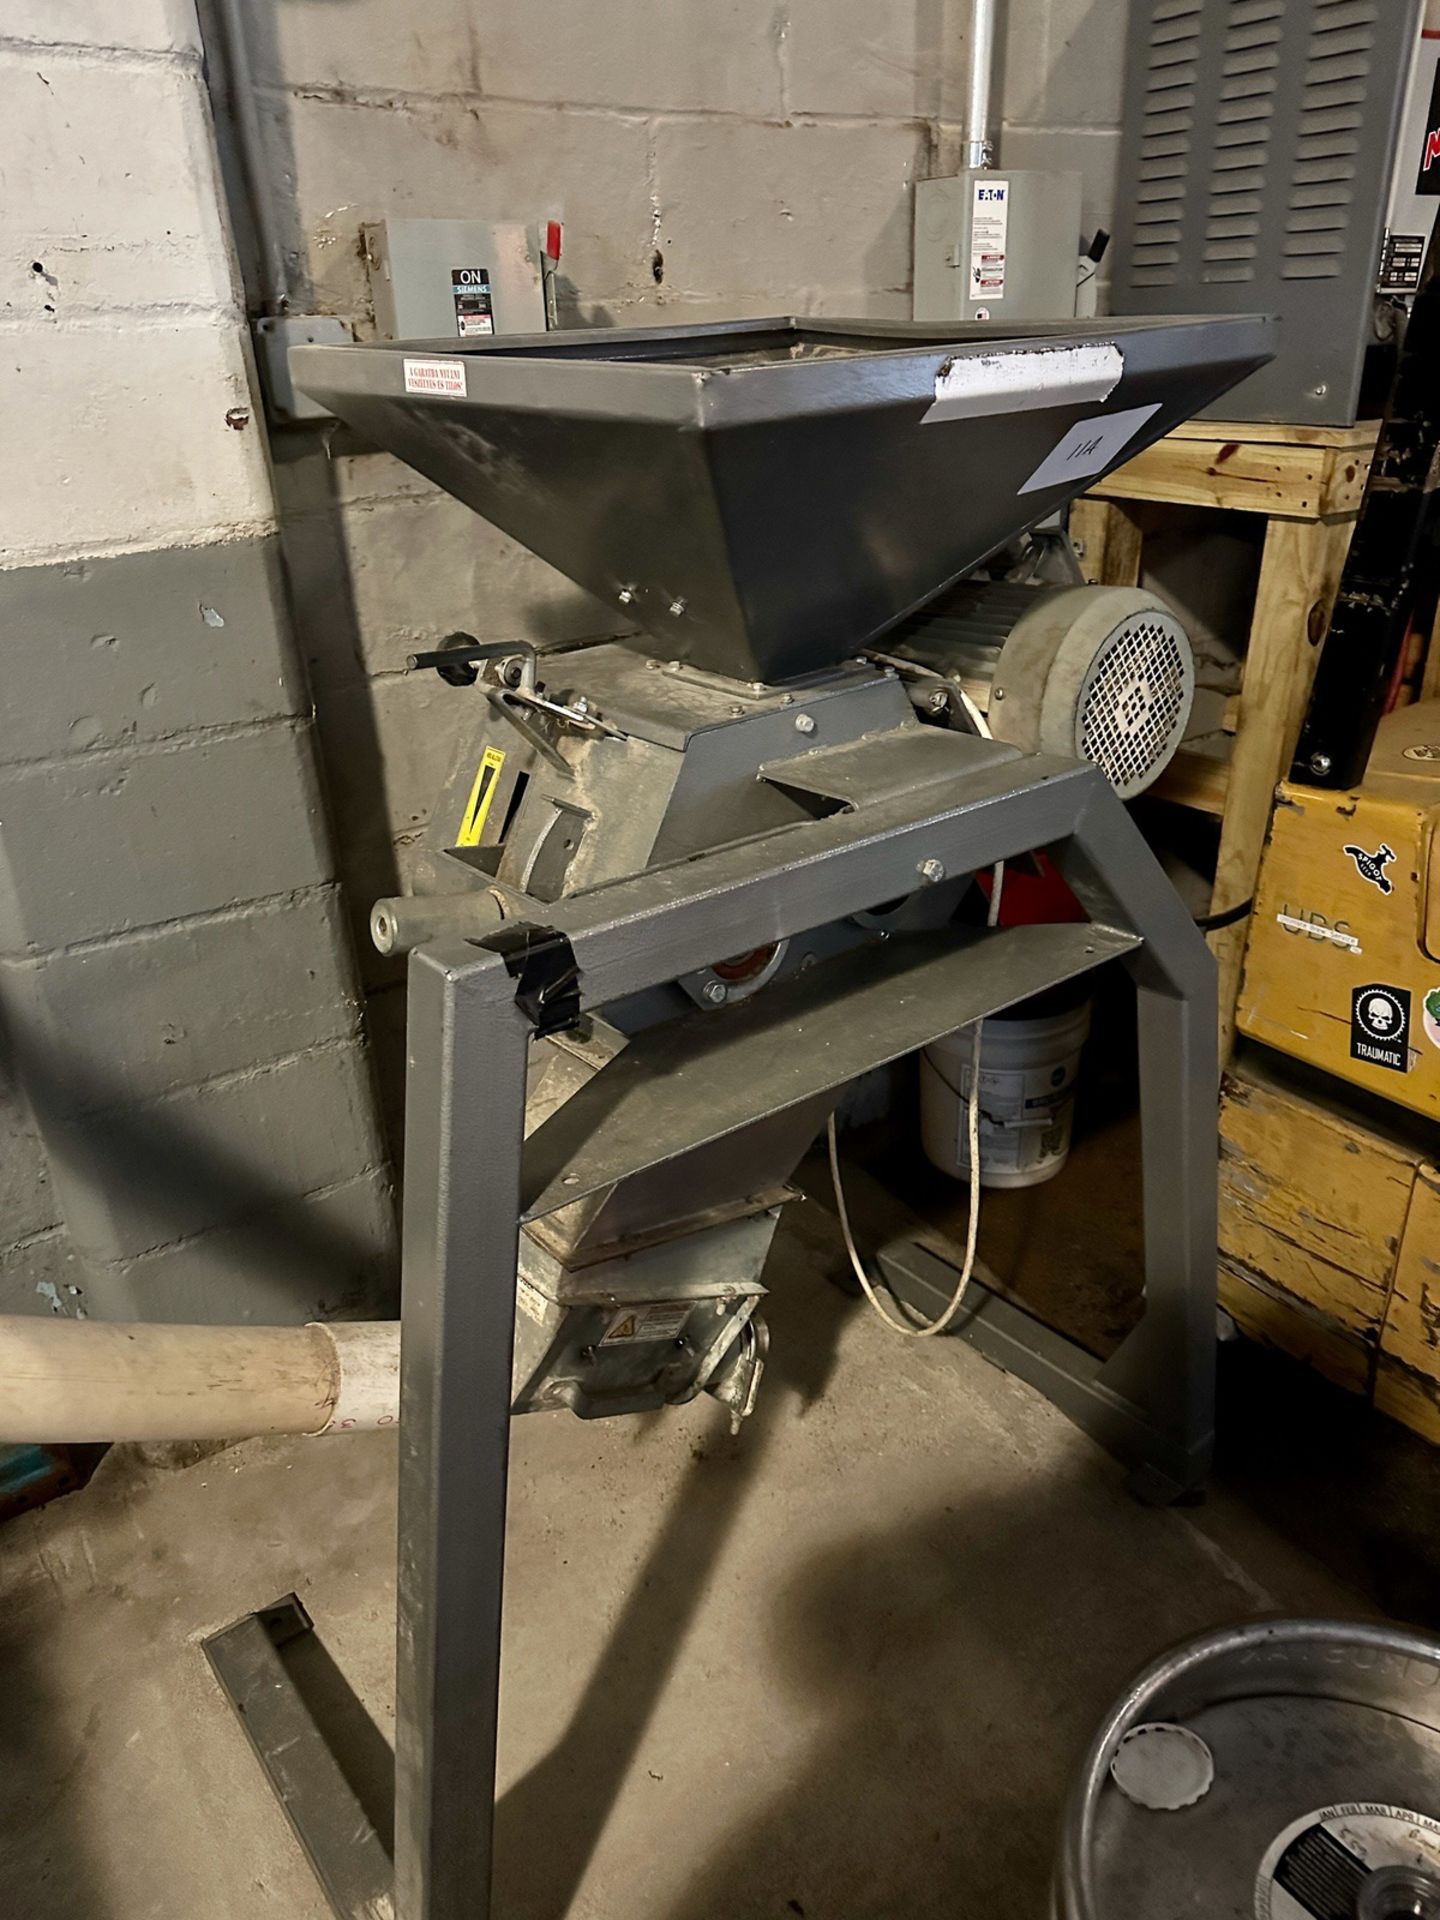 2-Roller Grain Mill, 4KW Motor, w/ Grain Auger & Drive, Approx 20ft to Grist Case | Rig Fee $100